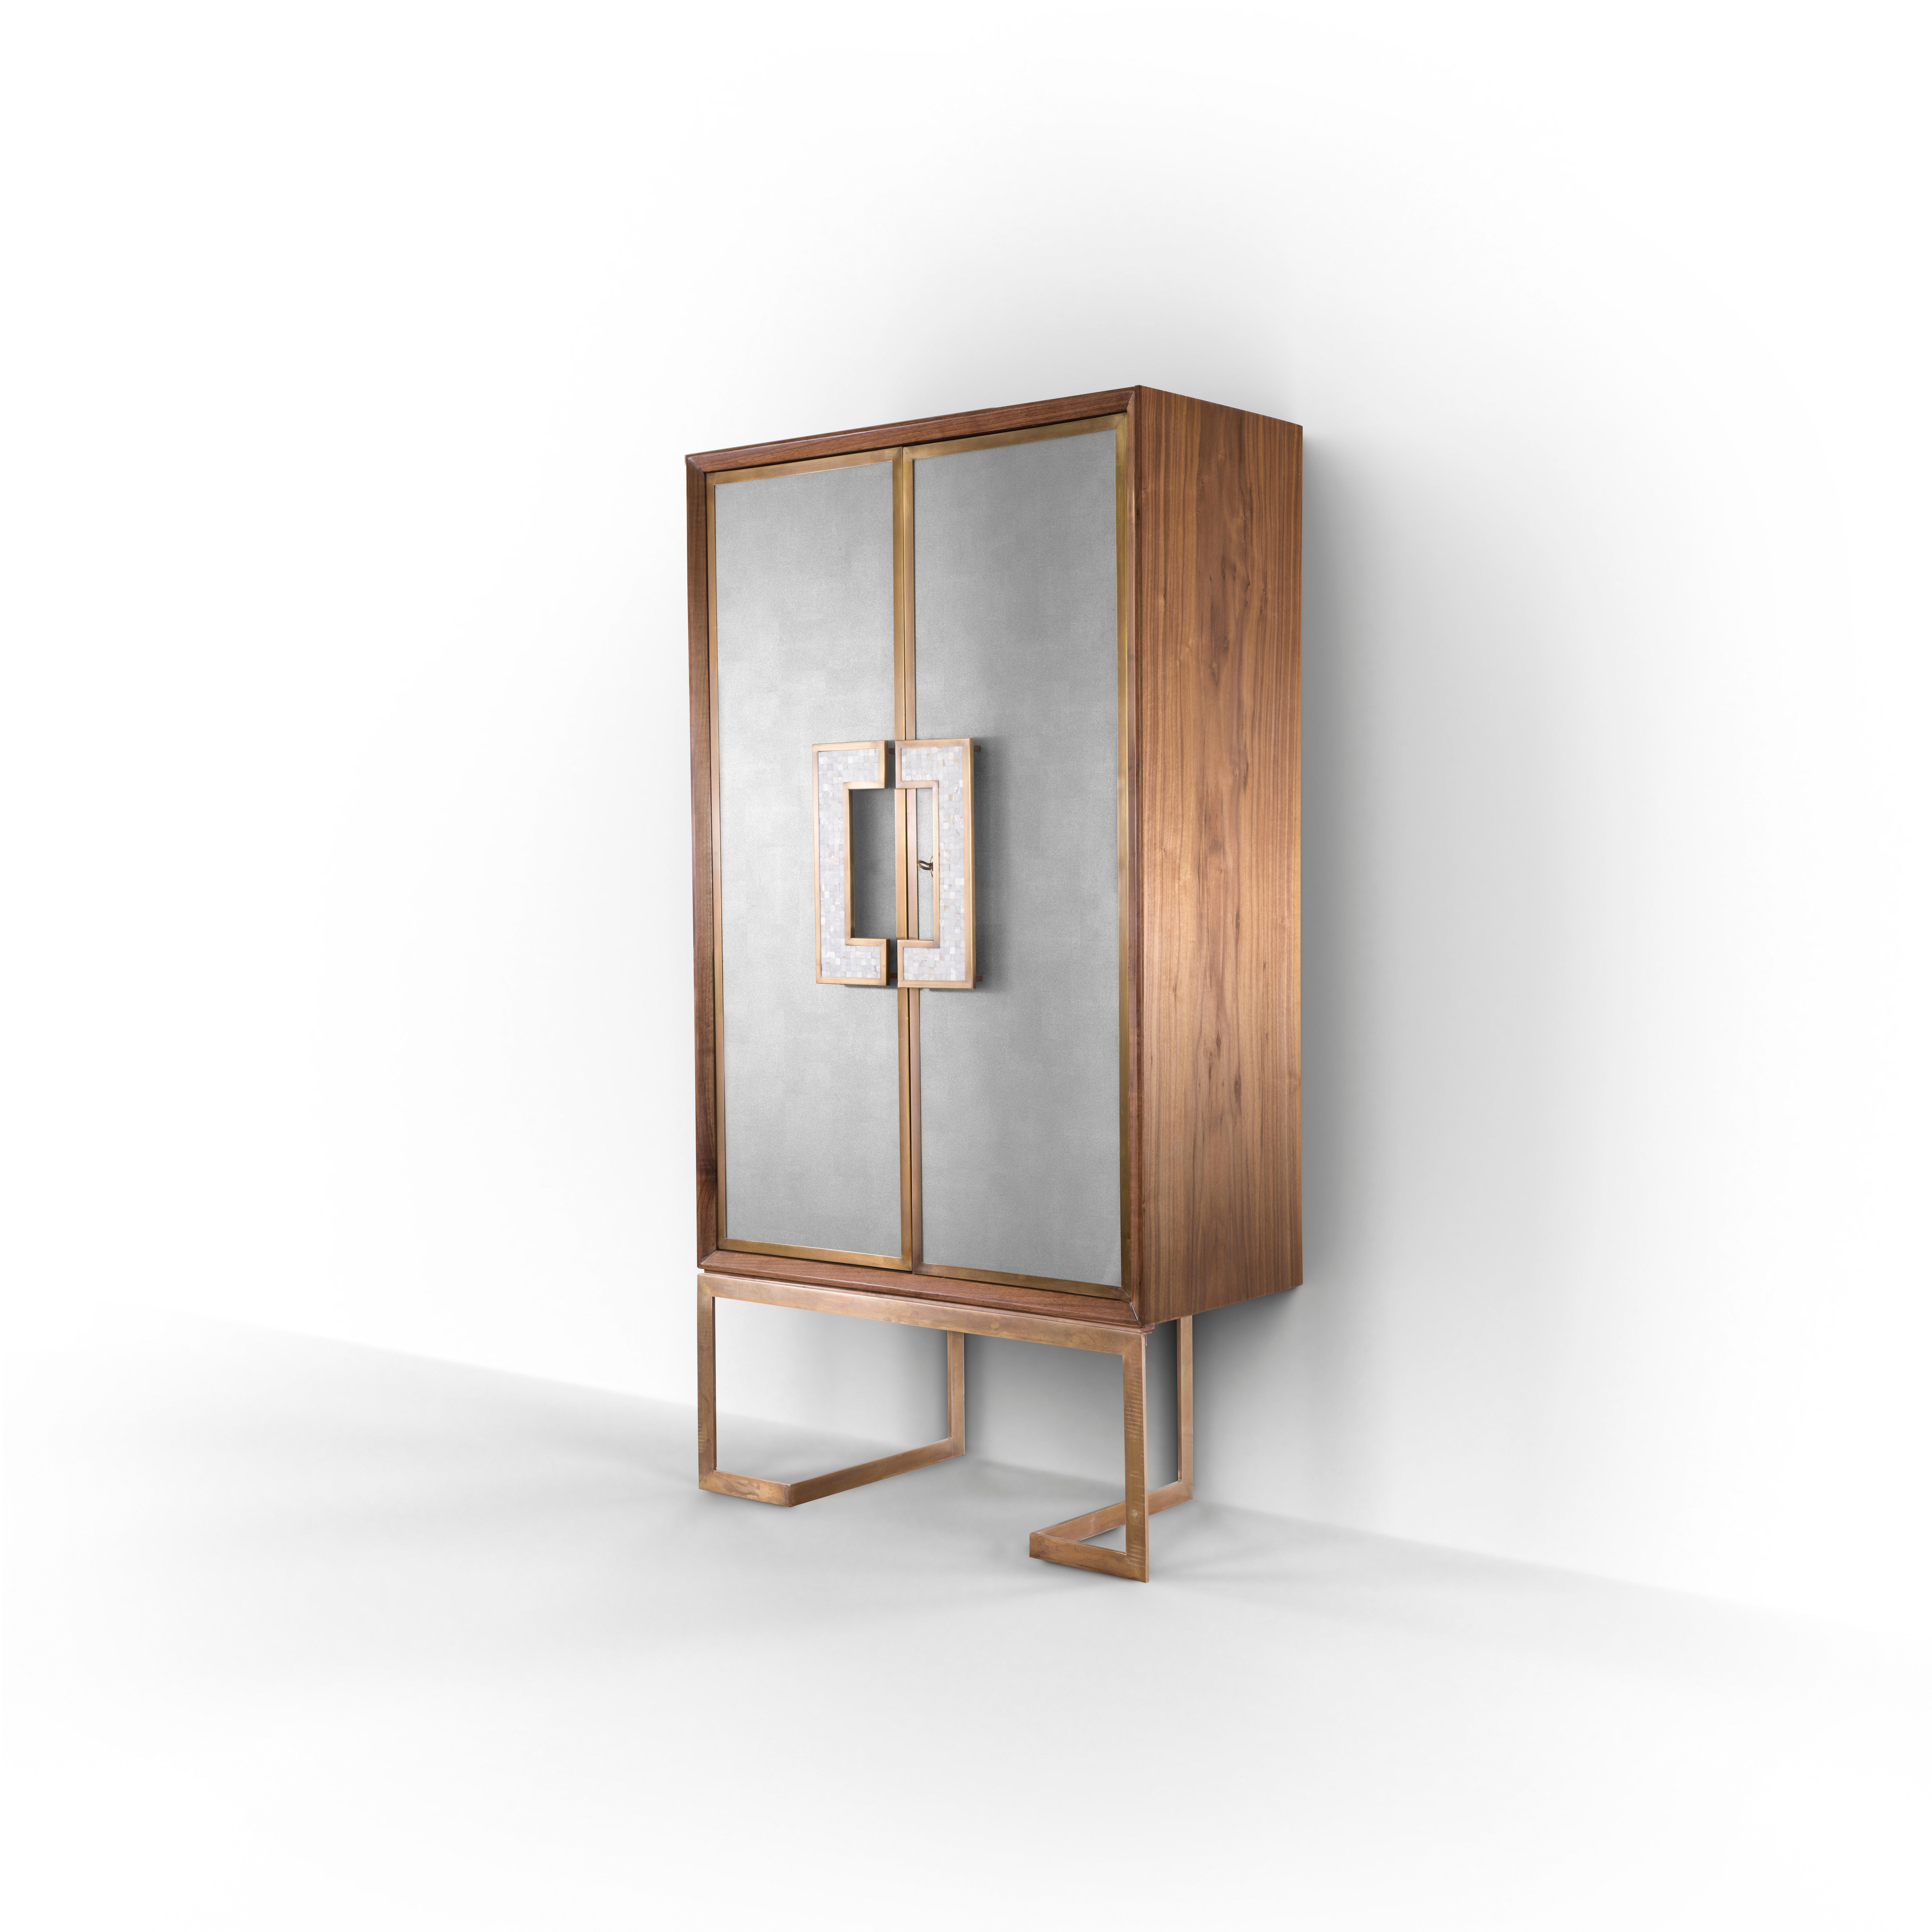 Walnut China Cabinet with Brass Framing and Mother-of-Pearl Handle. 
A sleek and modern cabinet accentuated with mother-of-pearl and brass detail. Our Sleek Fusion cabinet is a sophisticated Art Deco piece that brings more than glamour to your